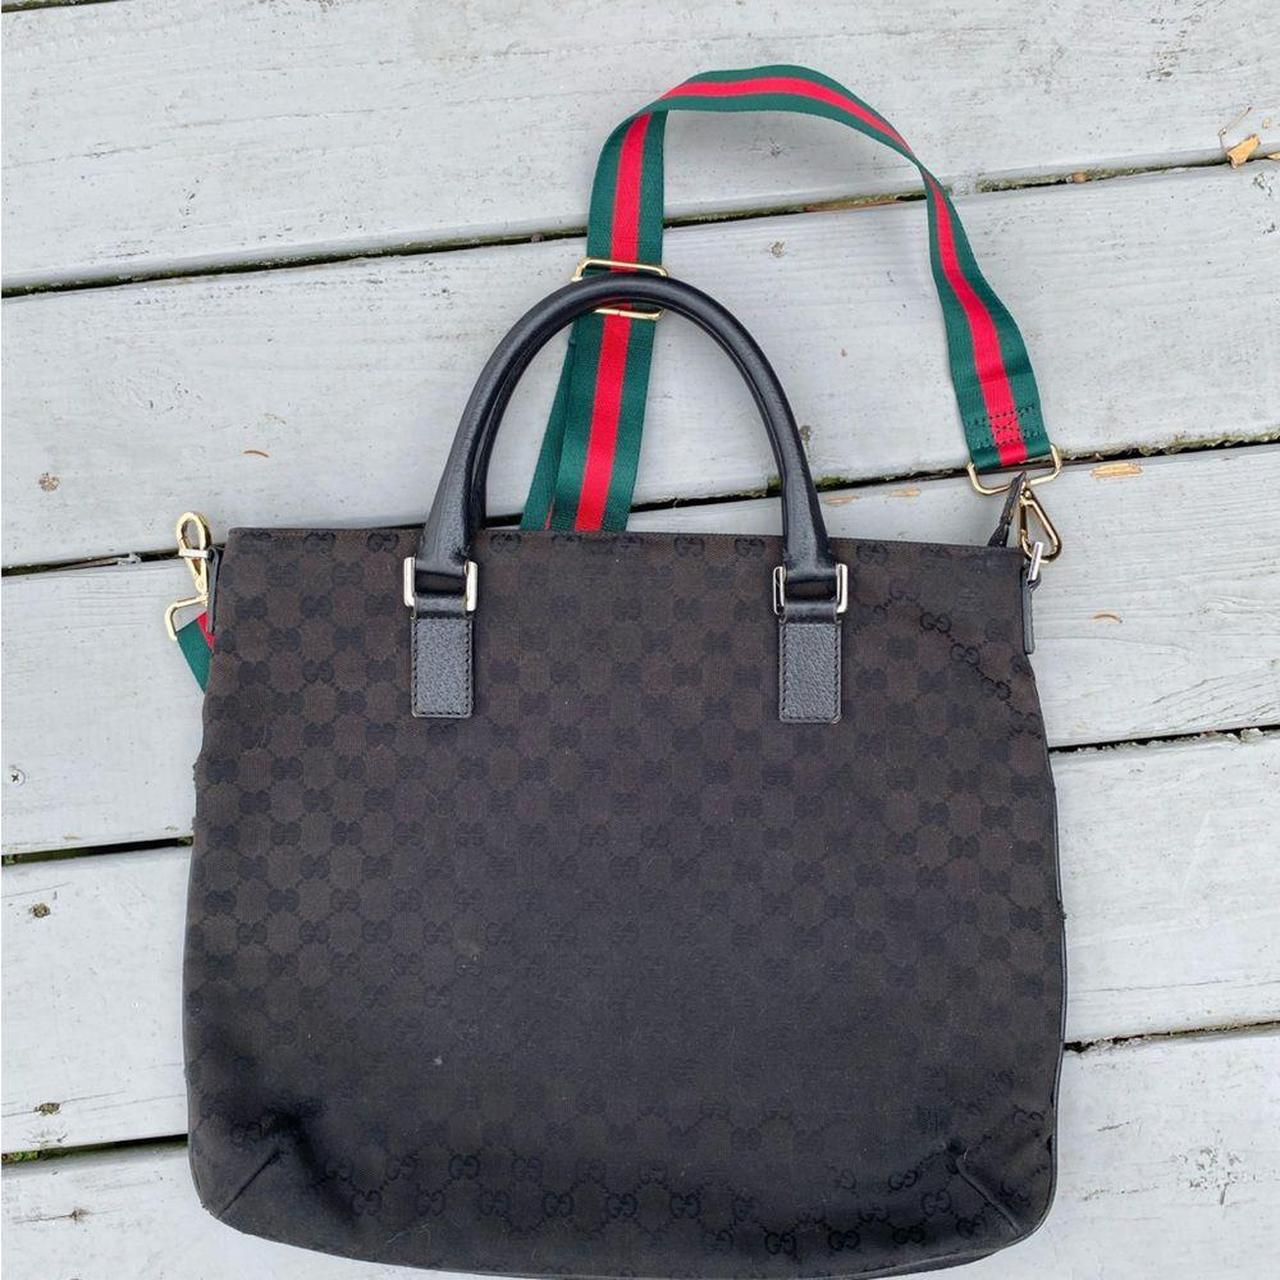 Gucci Women's Black and Grey Bag (2)